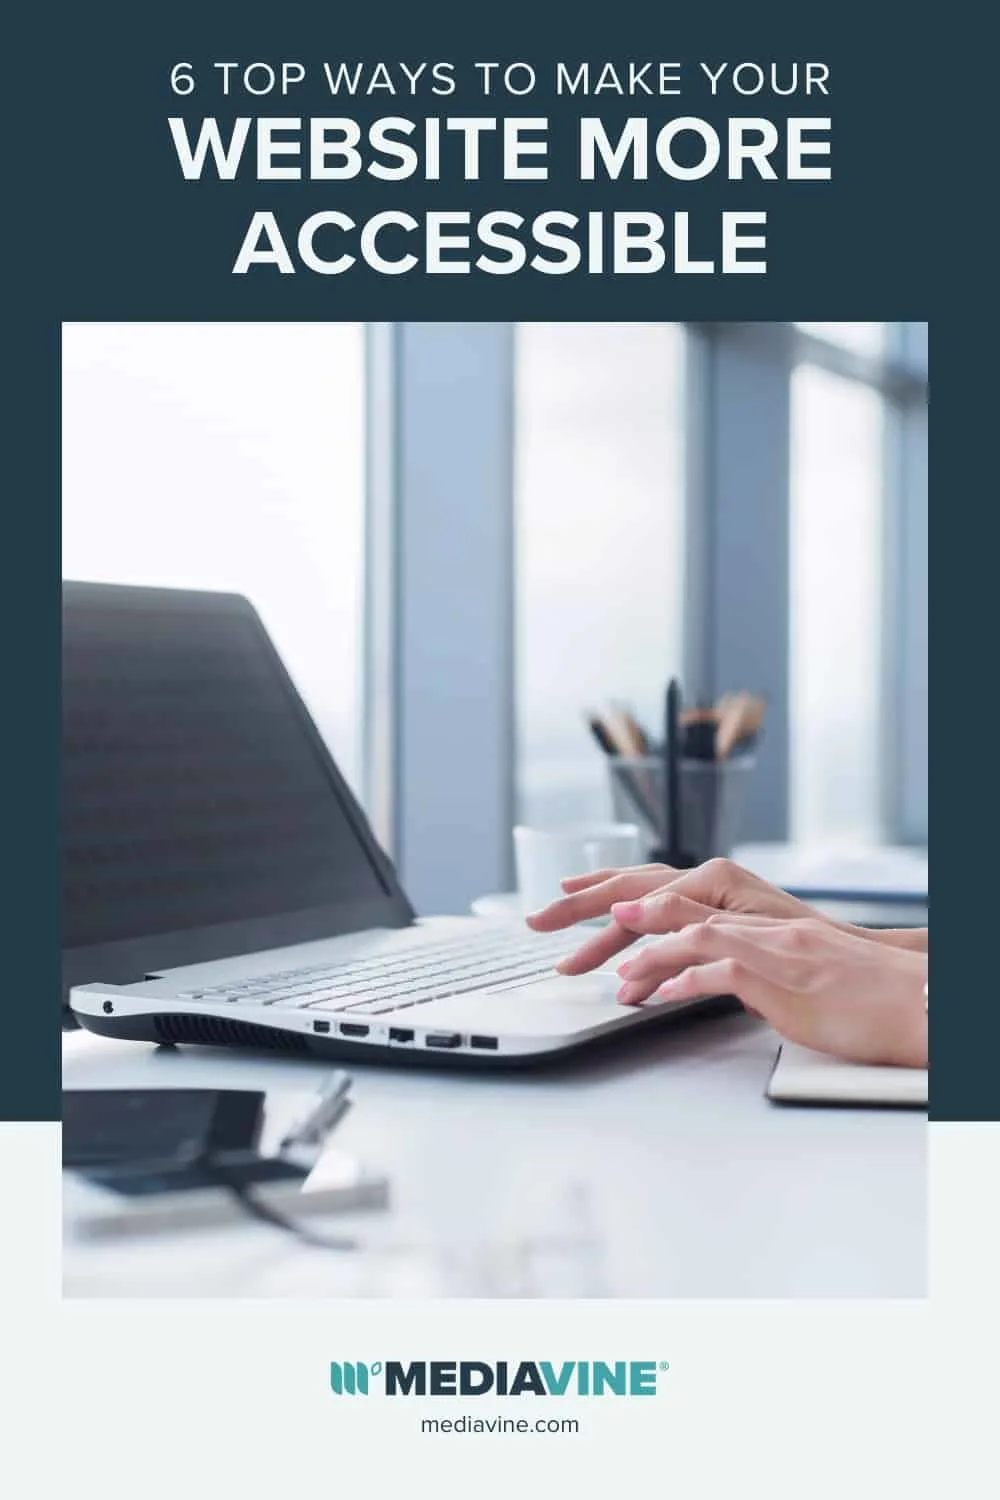 6 top ways to make your website more accessible - Mediavine Pinterest Image